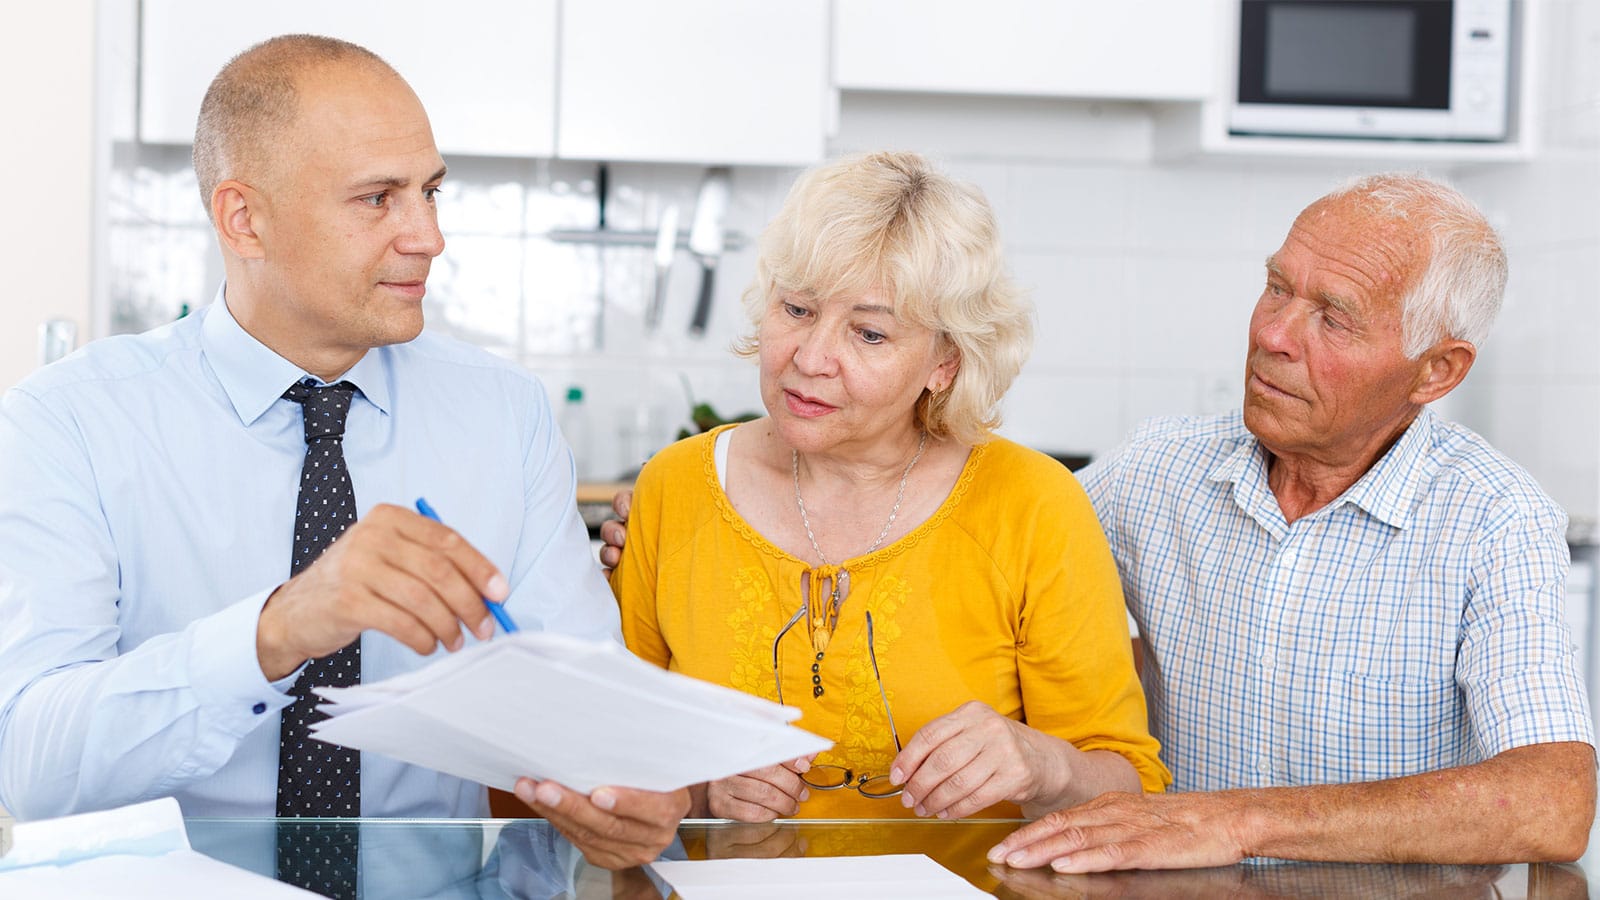 Personal Finance Manager assisting senior couple with their financial organization.